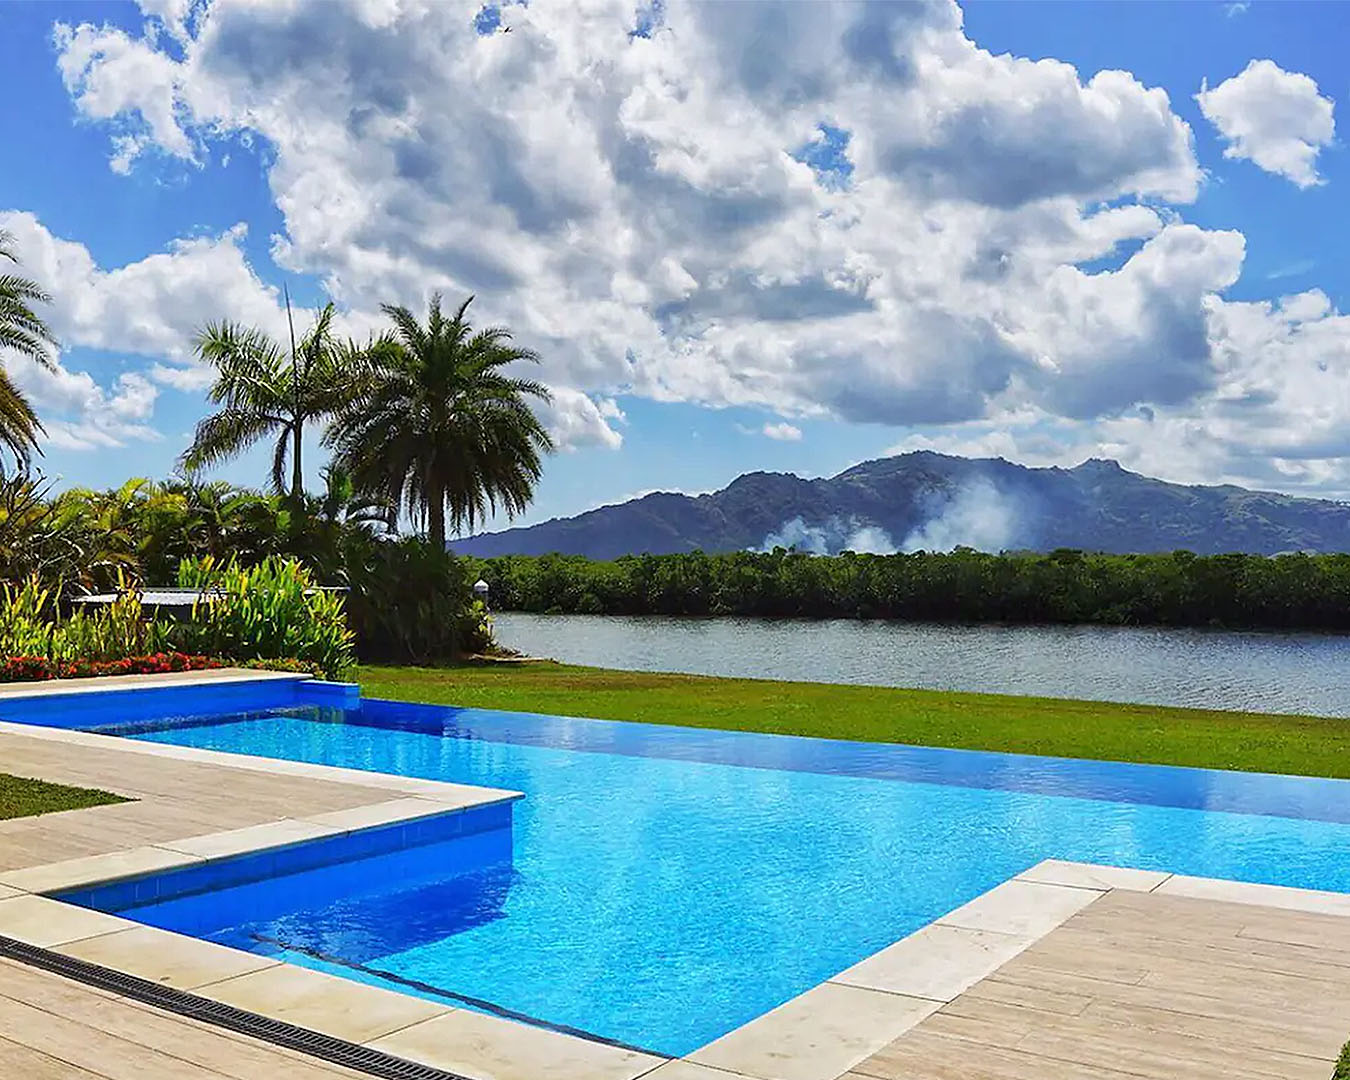 A stunning infinity pool with mountains in the background.